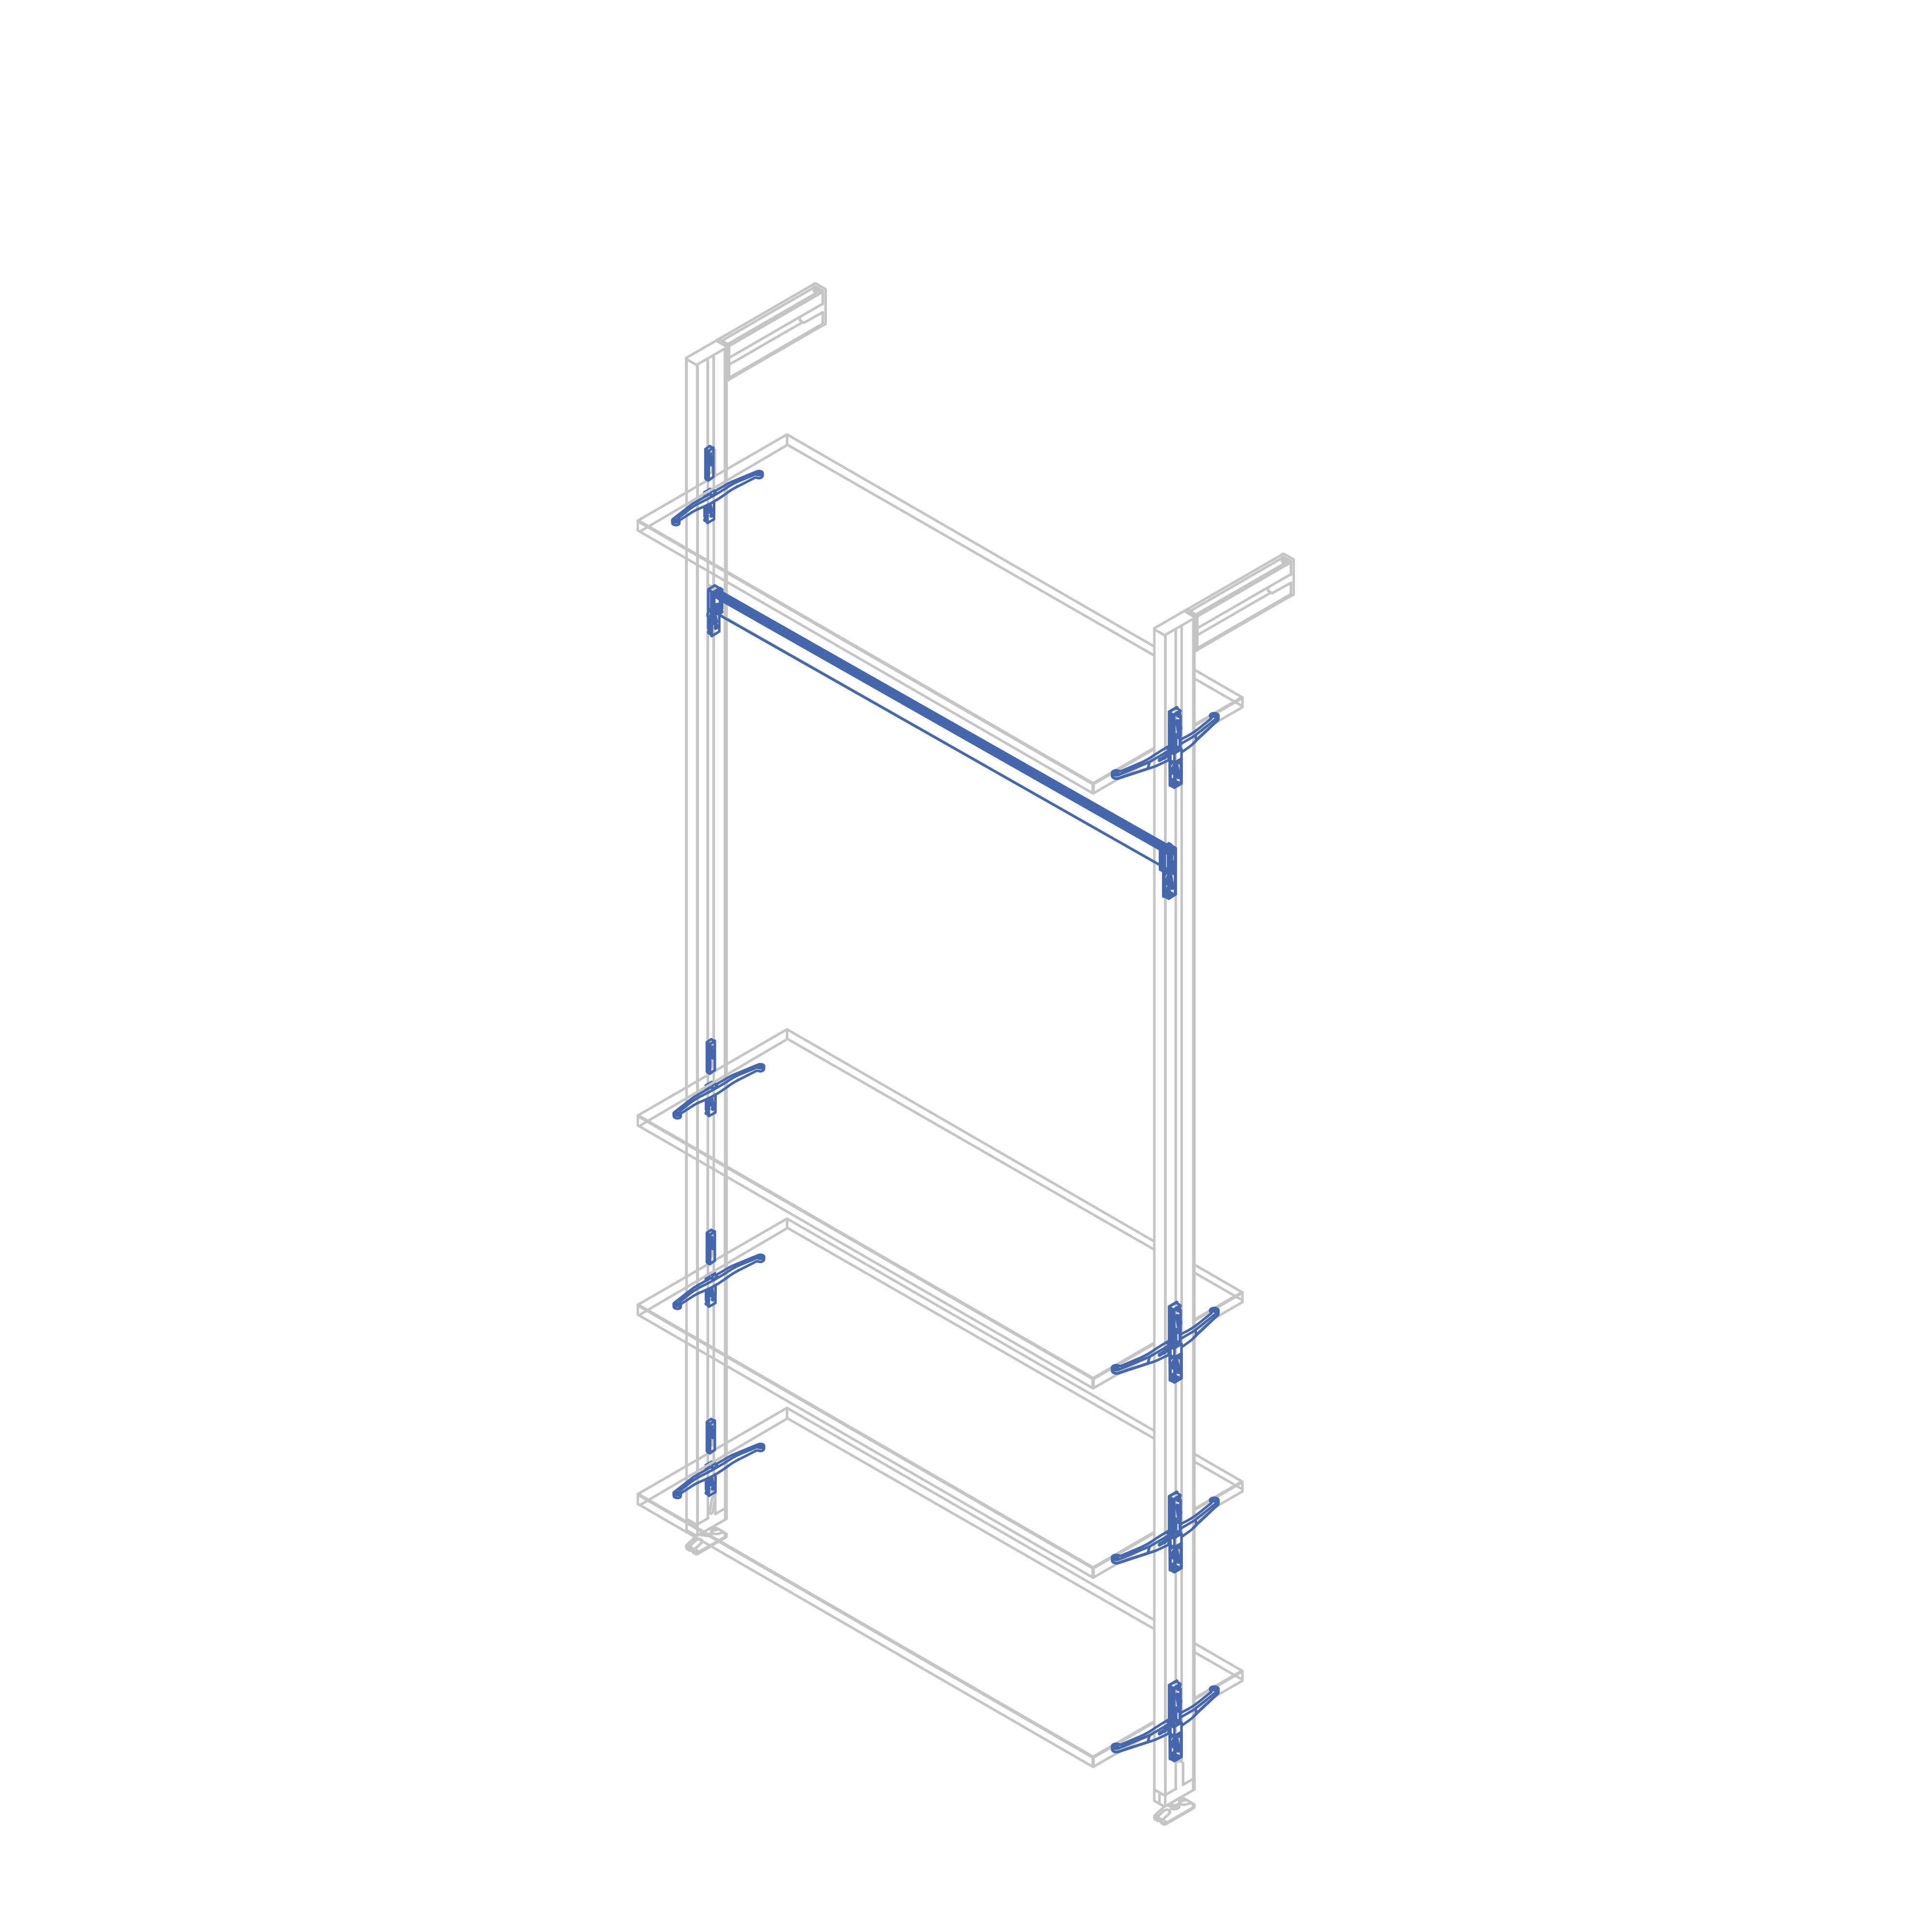 Kit of Supports kit for 4 Wooden shelves and 1 hanging rail 1m 